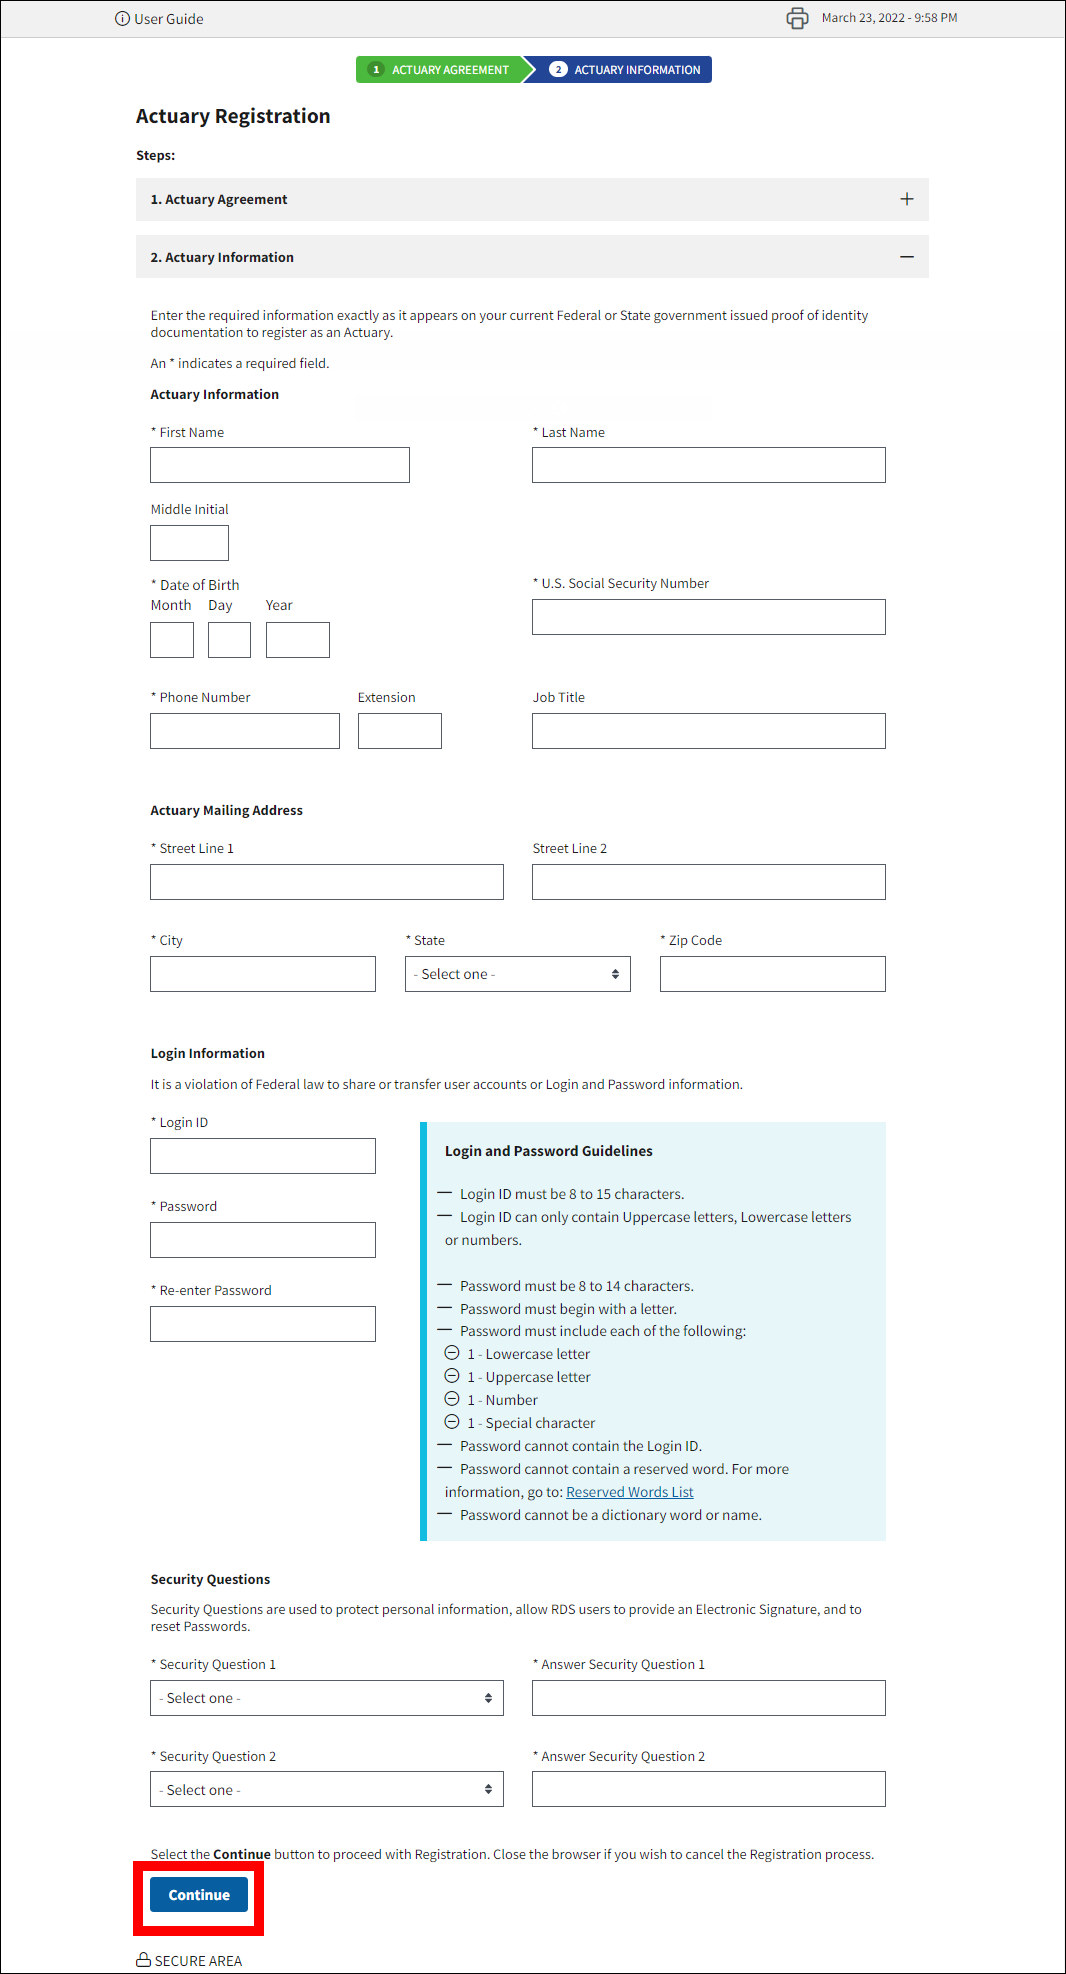 Actuary Registration page with Continue button highlighted.